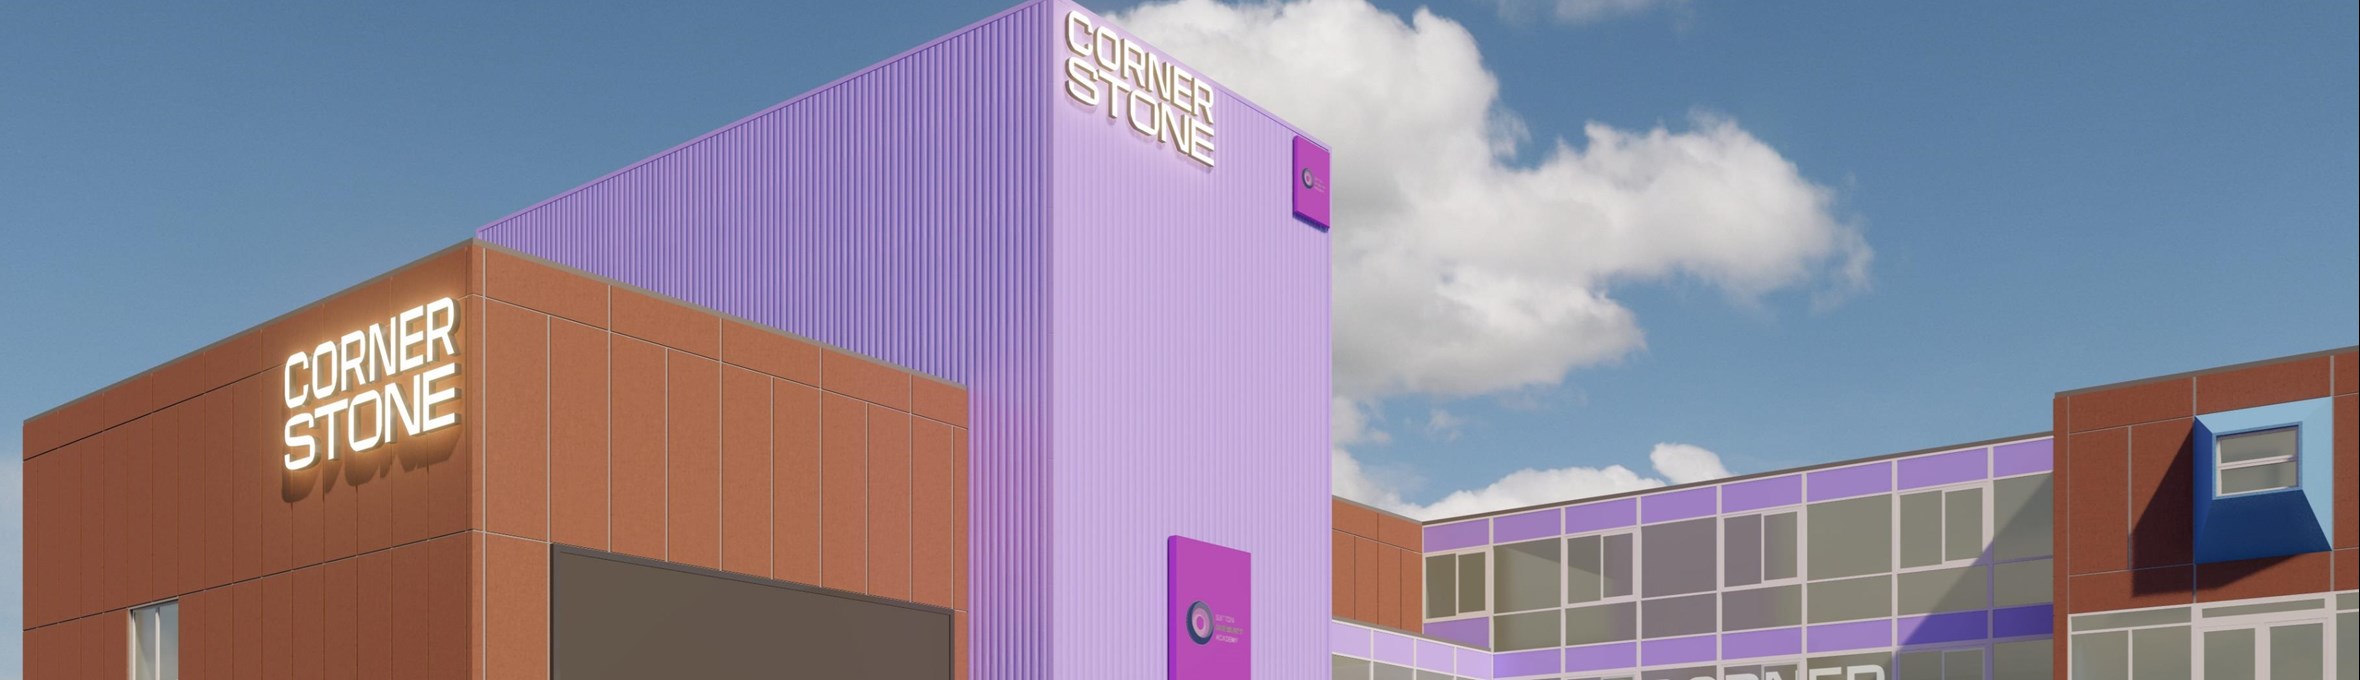 An artist impression of the theatre which is clad in purple with the name Cornerstone  